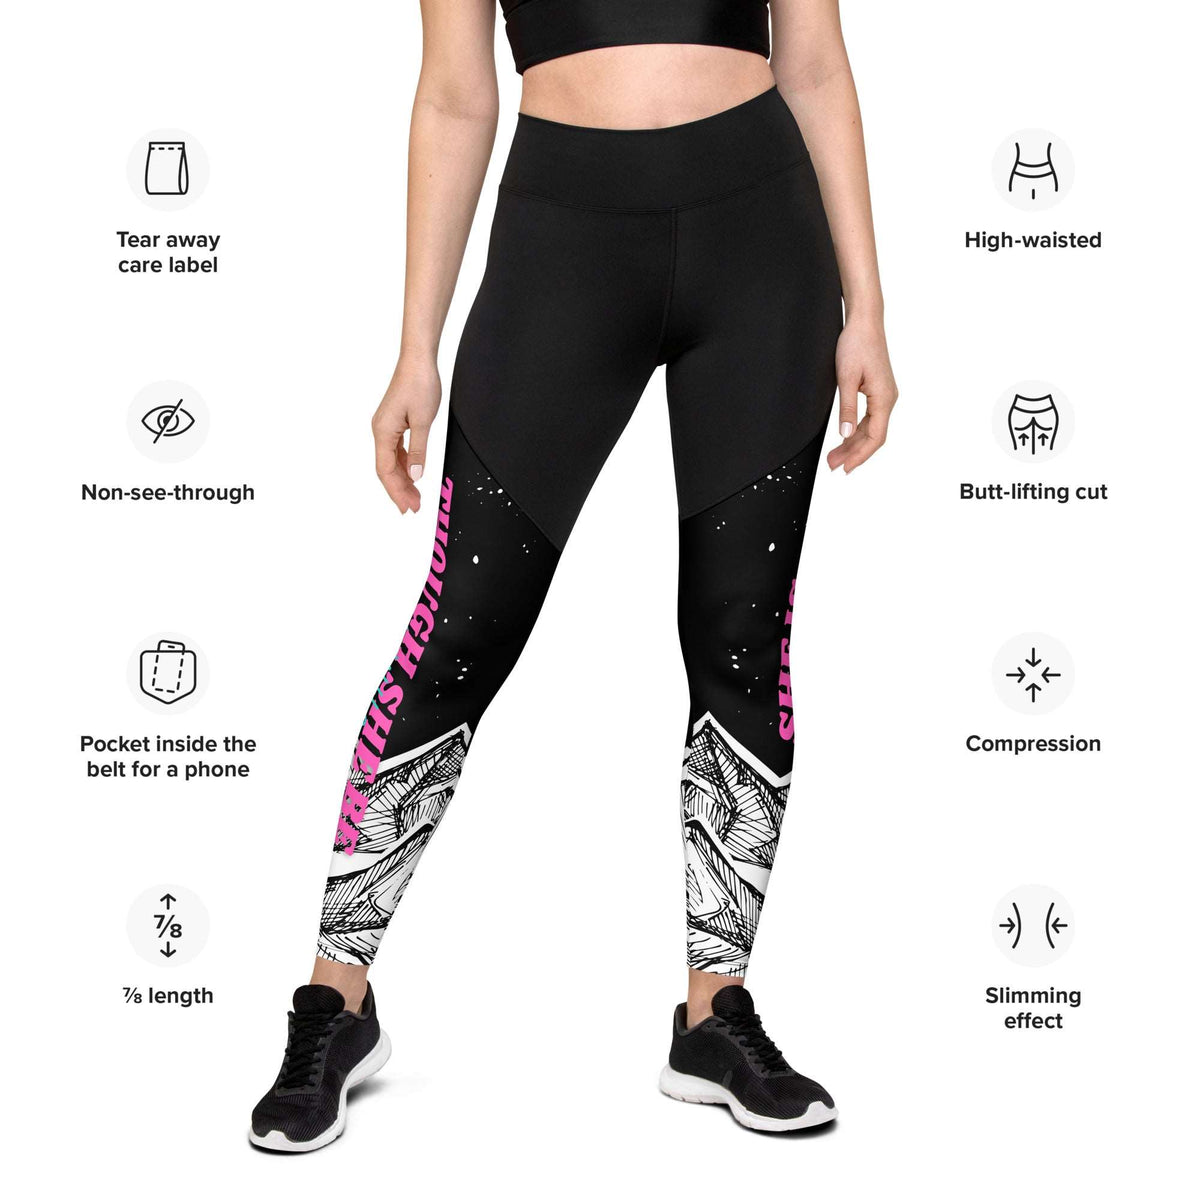 Though She Be But Little, She Is Fierce - Sports Leggings w/Inside Pocket - HikeRunLive Collection